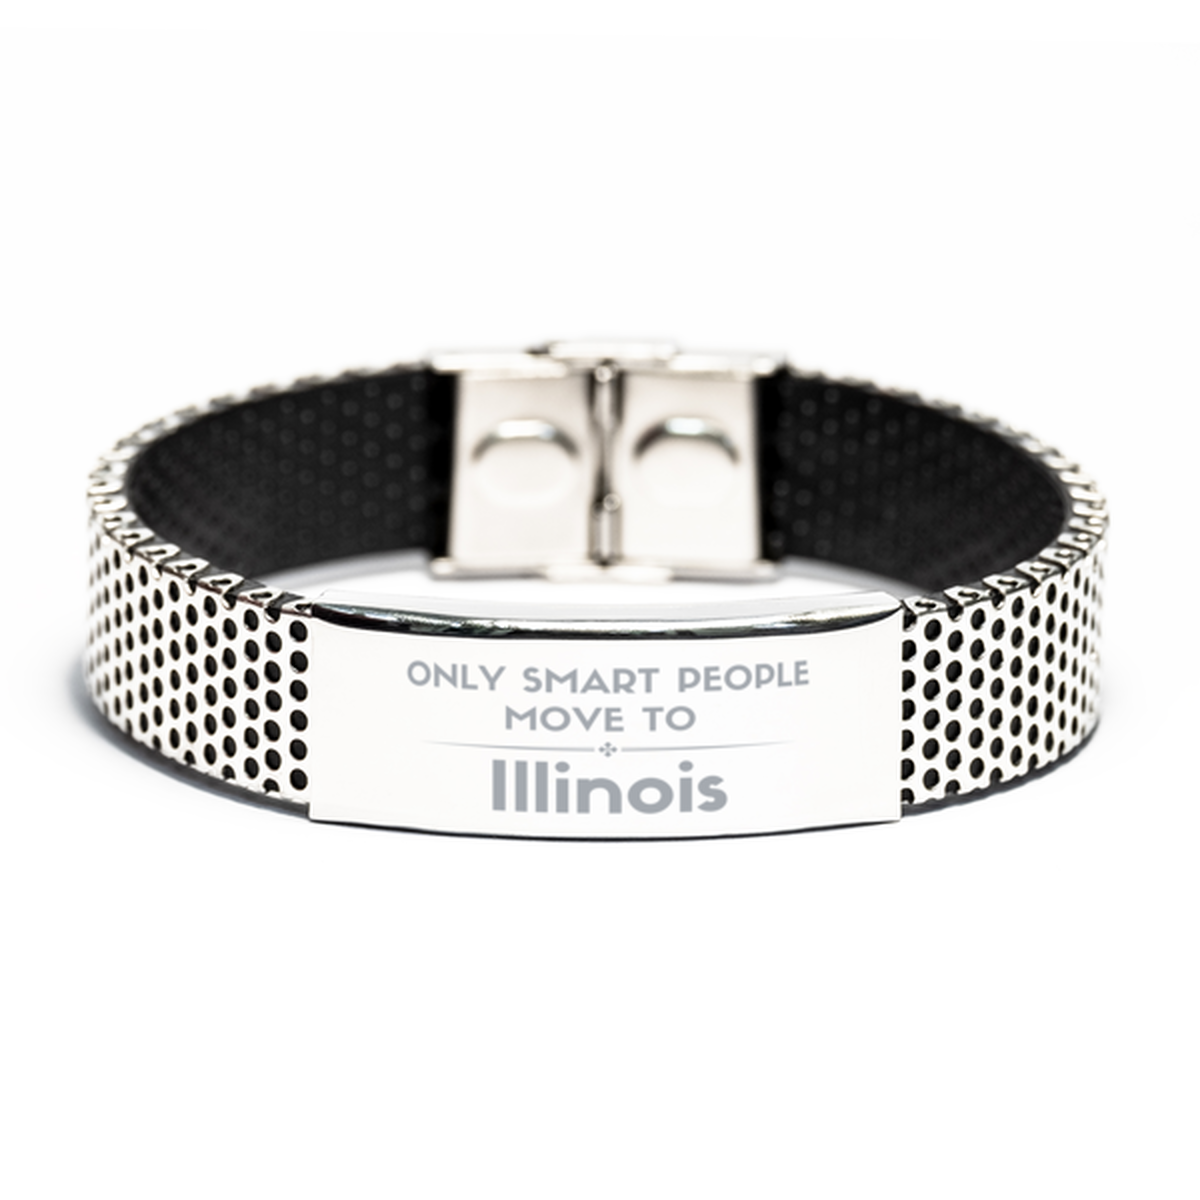 Only smart people move to Illinois Stainless Steel Bracelet, Gag Gifts For Illinois, Move to Illinois Gifts for Friends Coworker Funny Saying Quote